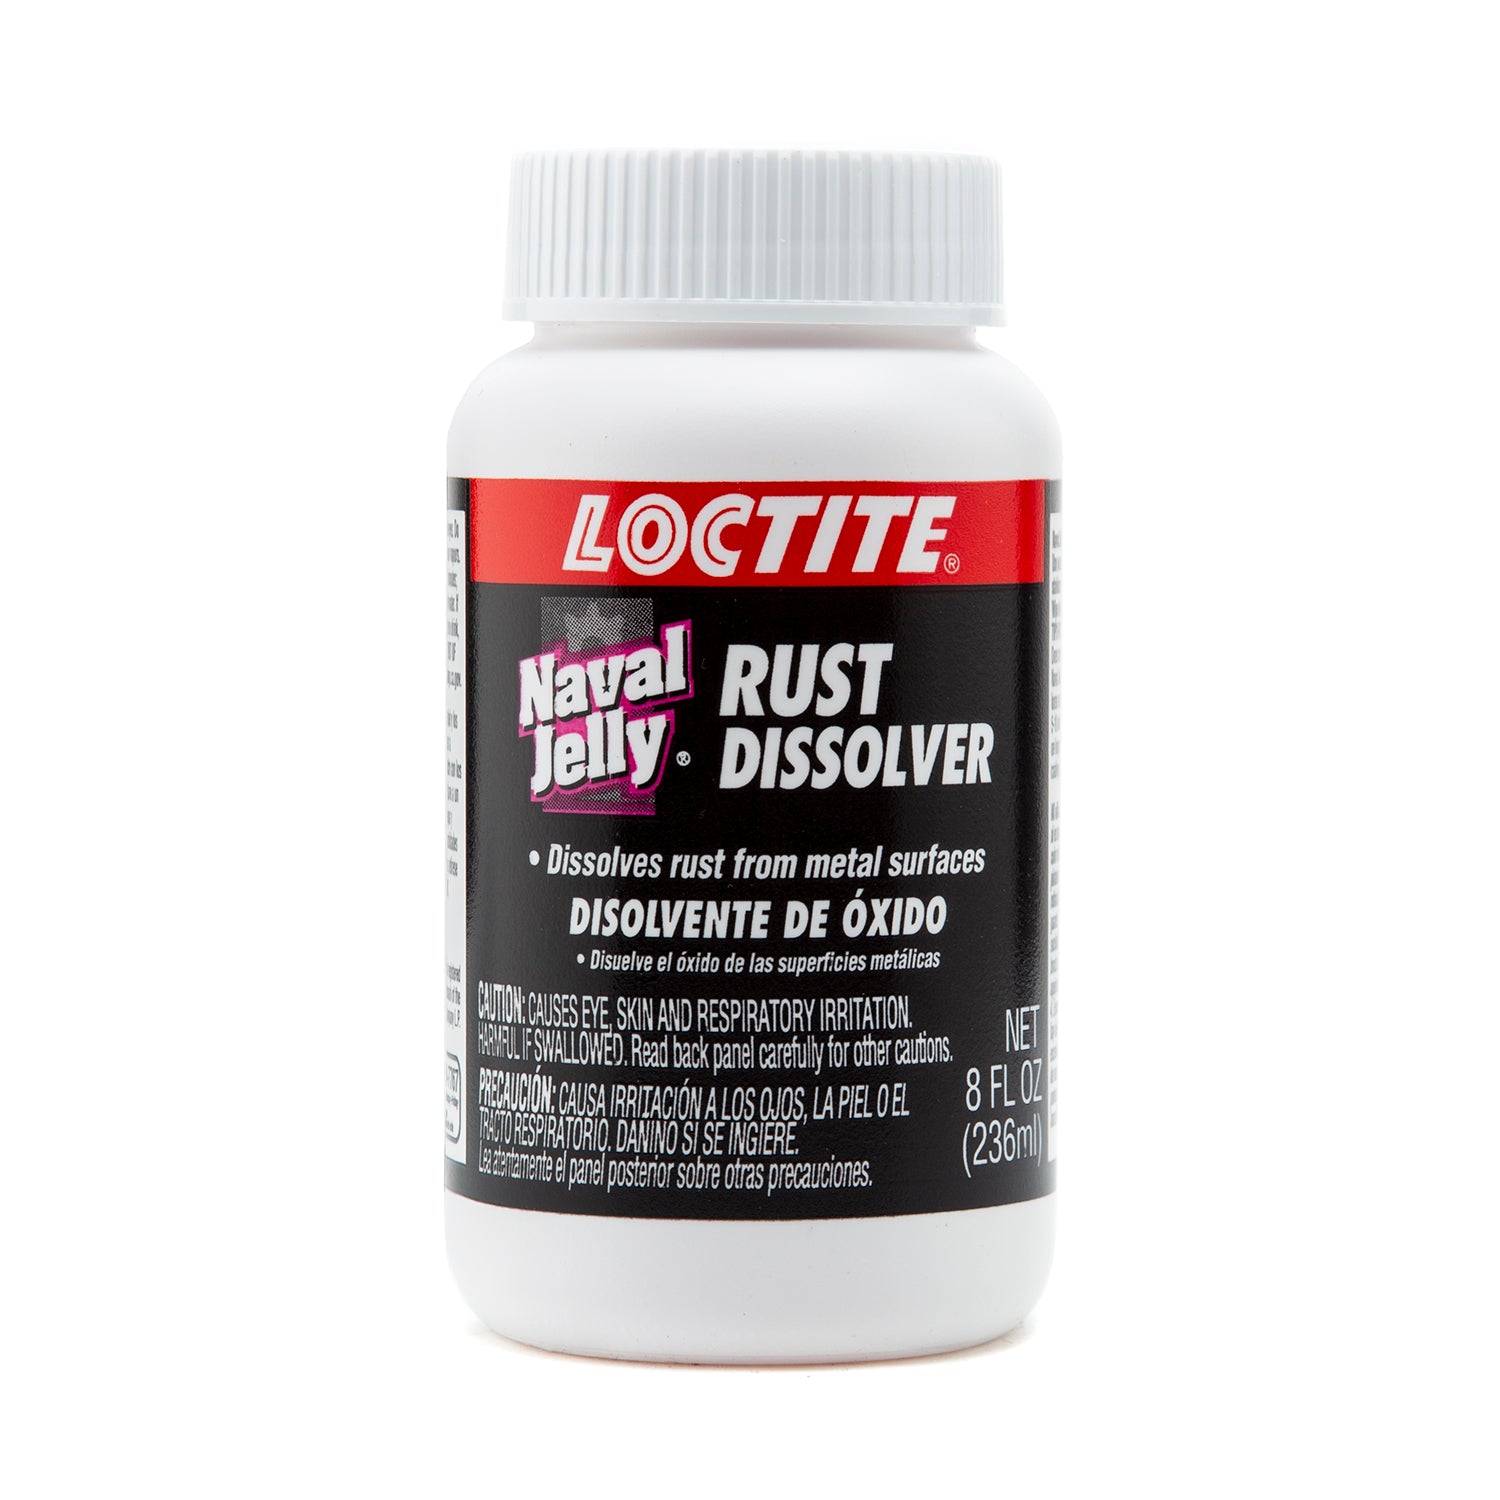 Naval Jelly rust remover?